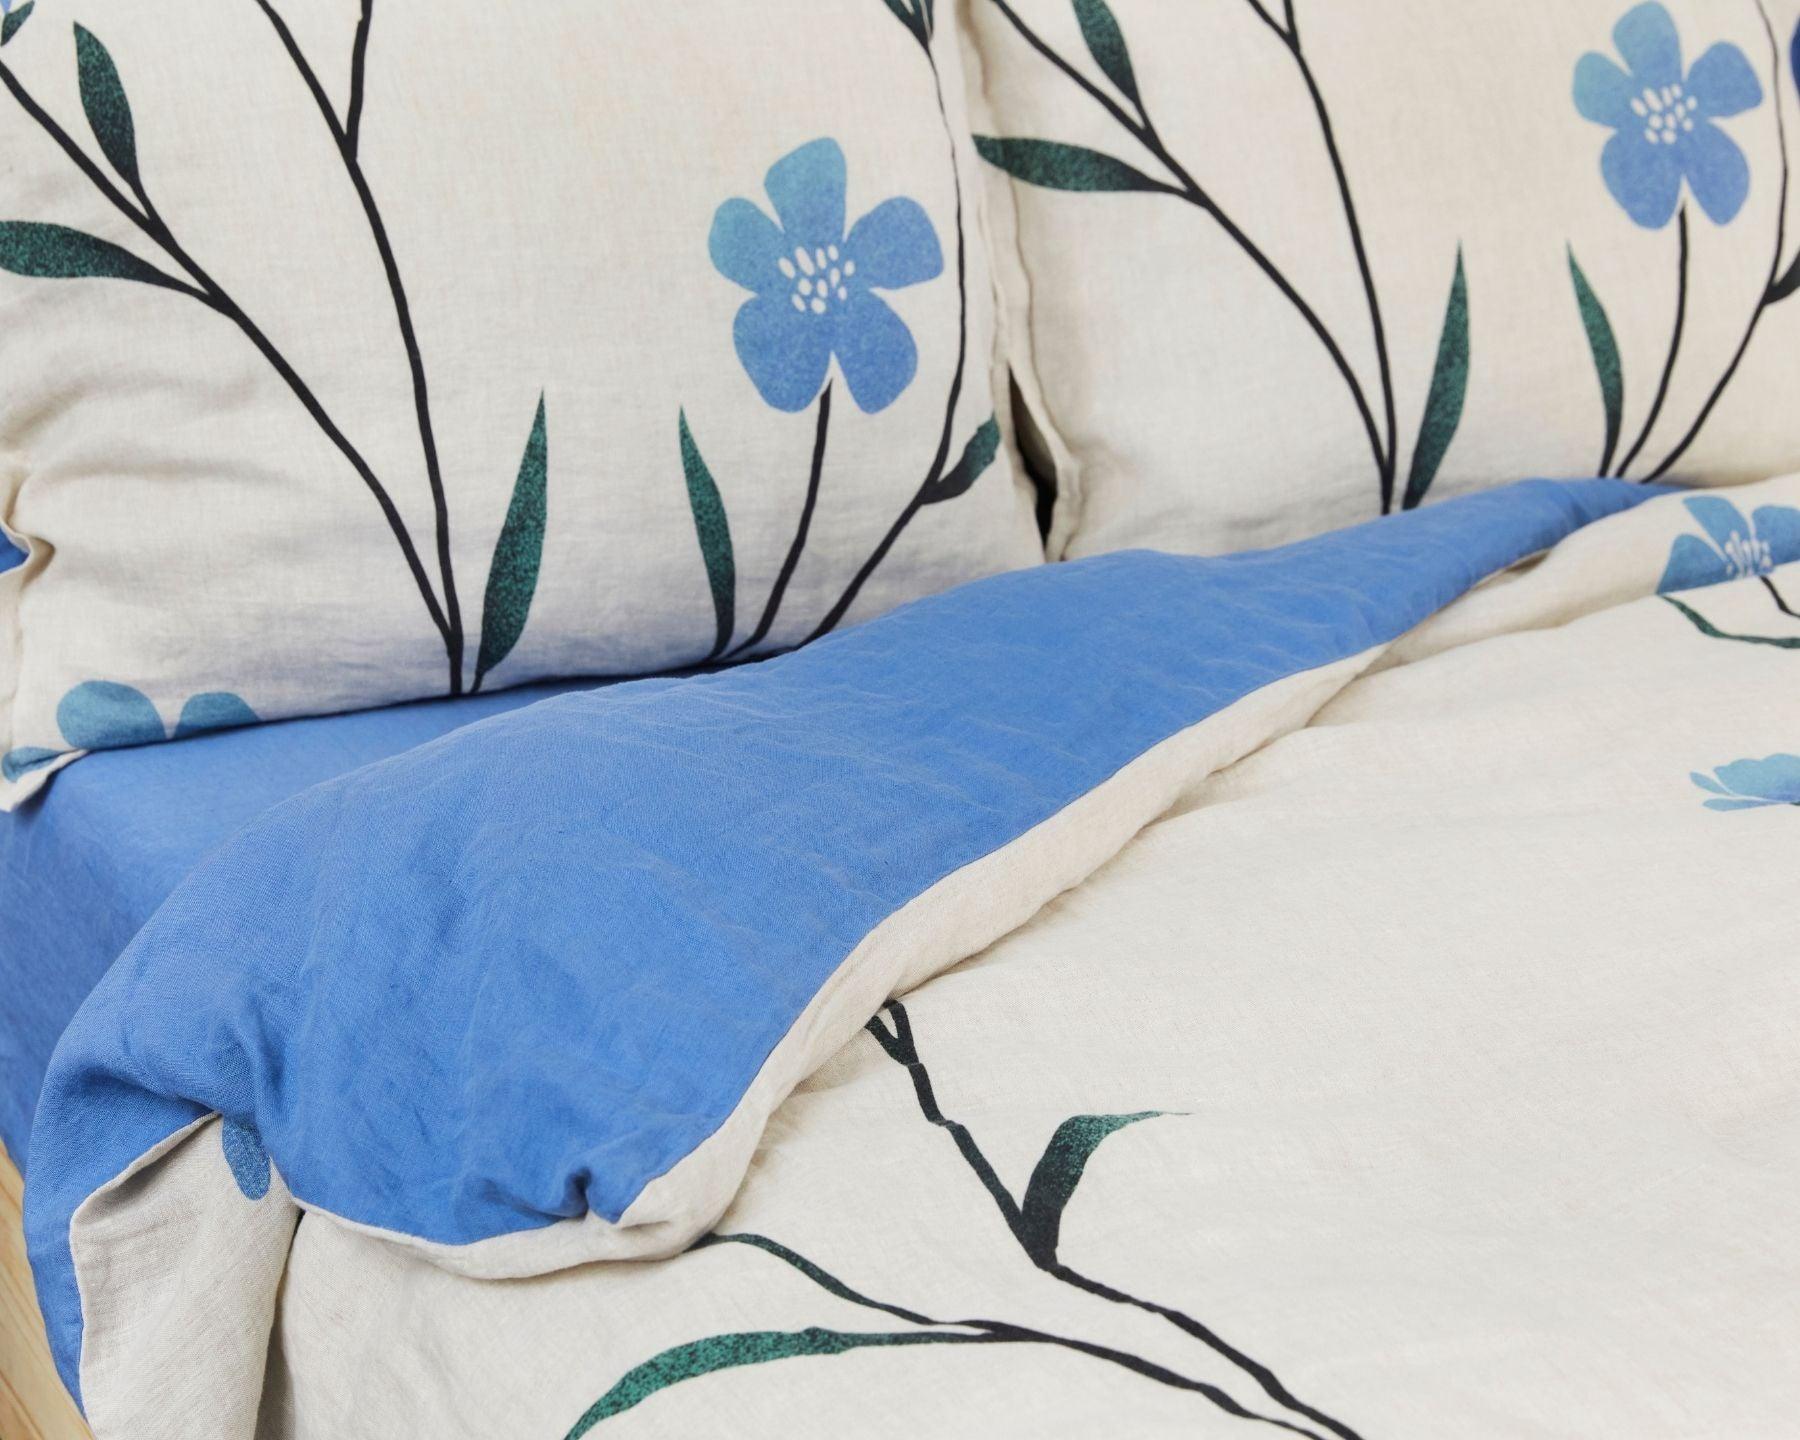 Flax Planet: Stylish and Cozy Linen Bedding and Home Textiles